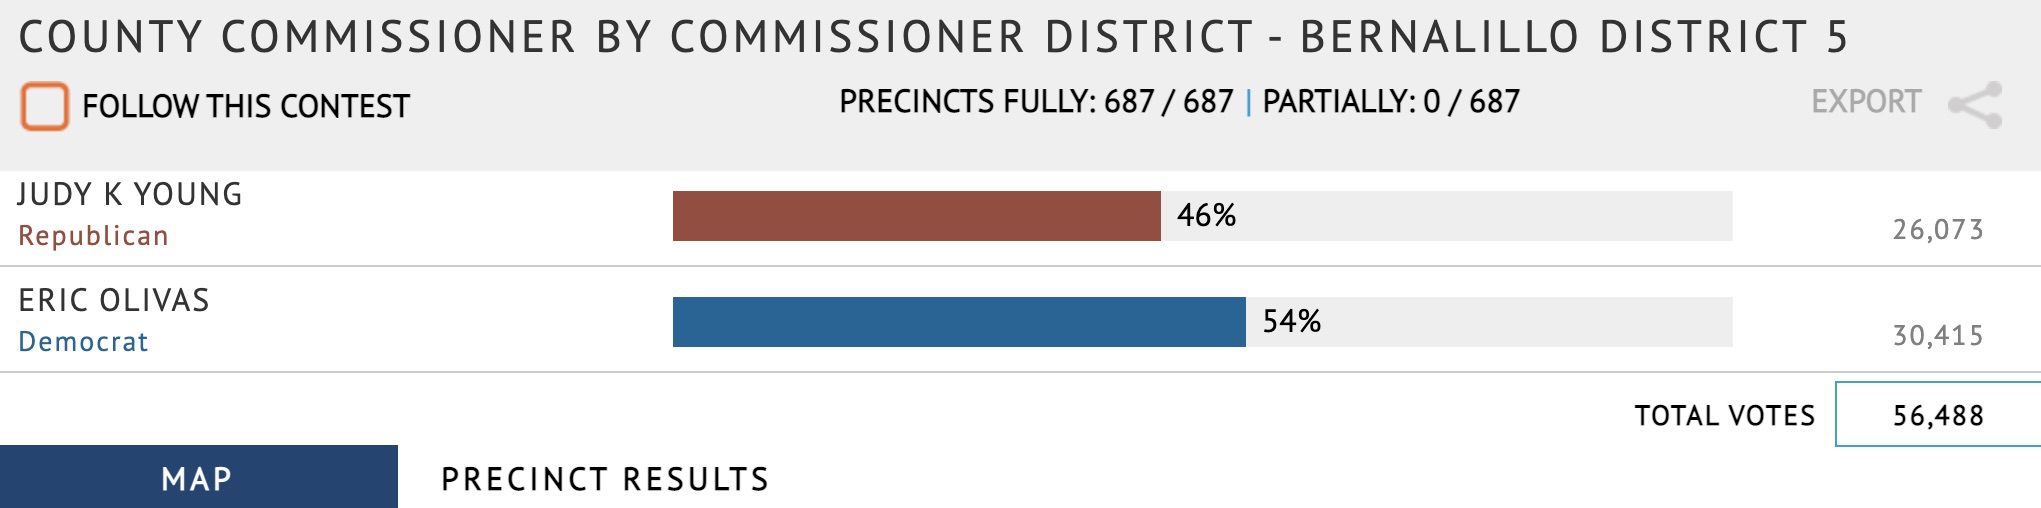 County Commissioner Results for District 5